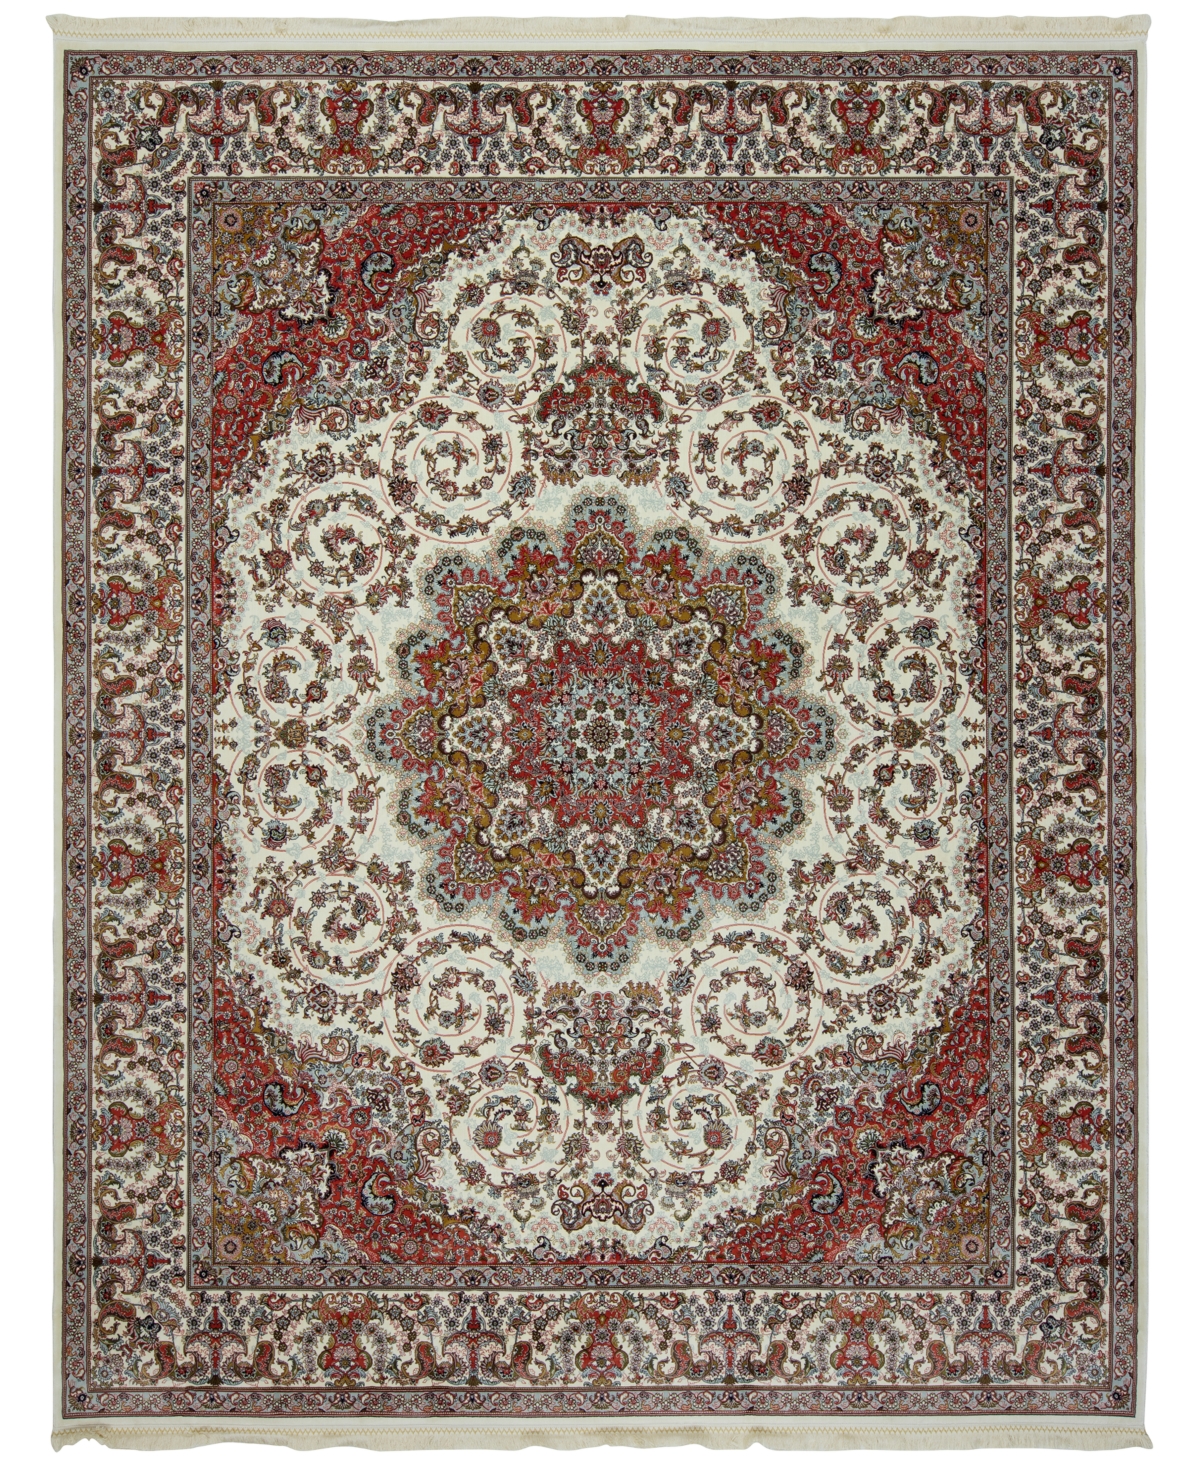 Kenneth Mink Closeout! Persian Treasures Shah 8' X 10' Area Rug In Cream